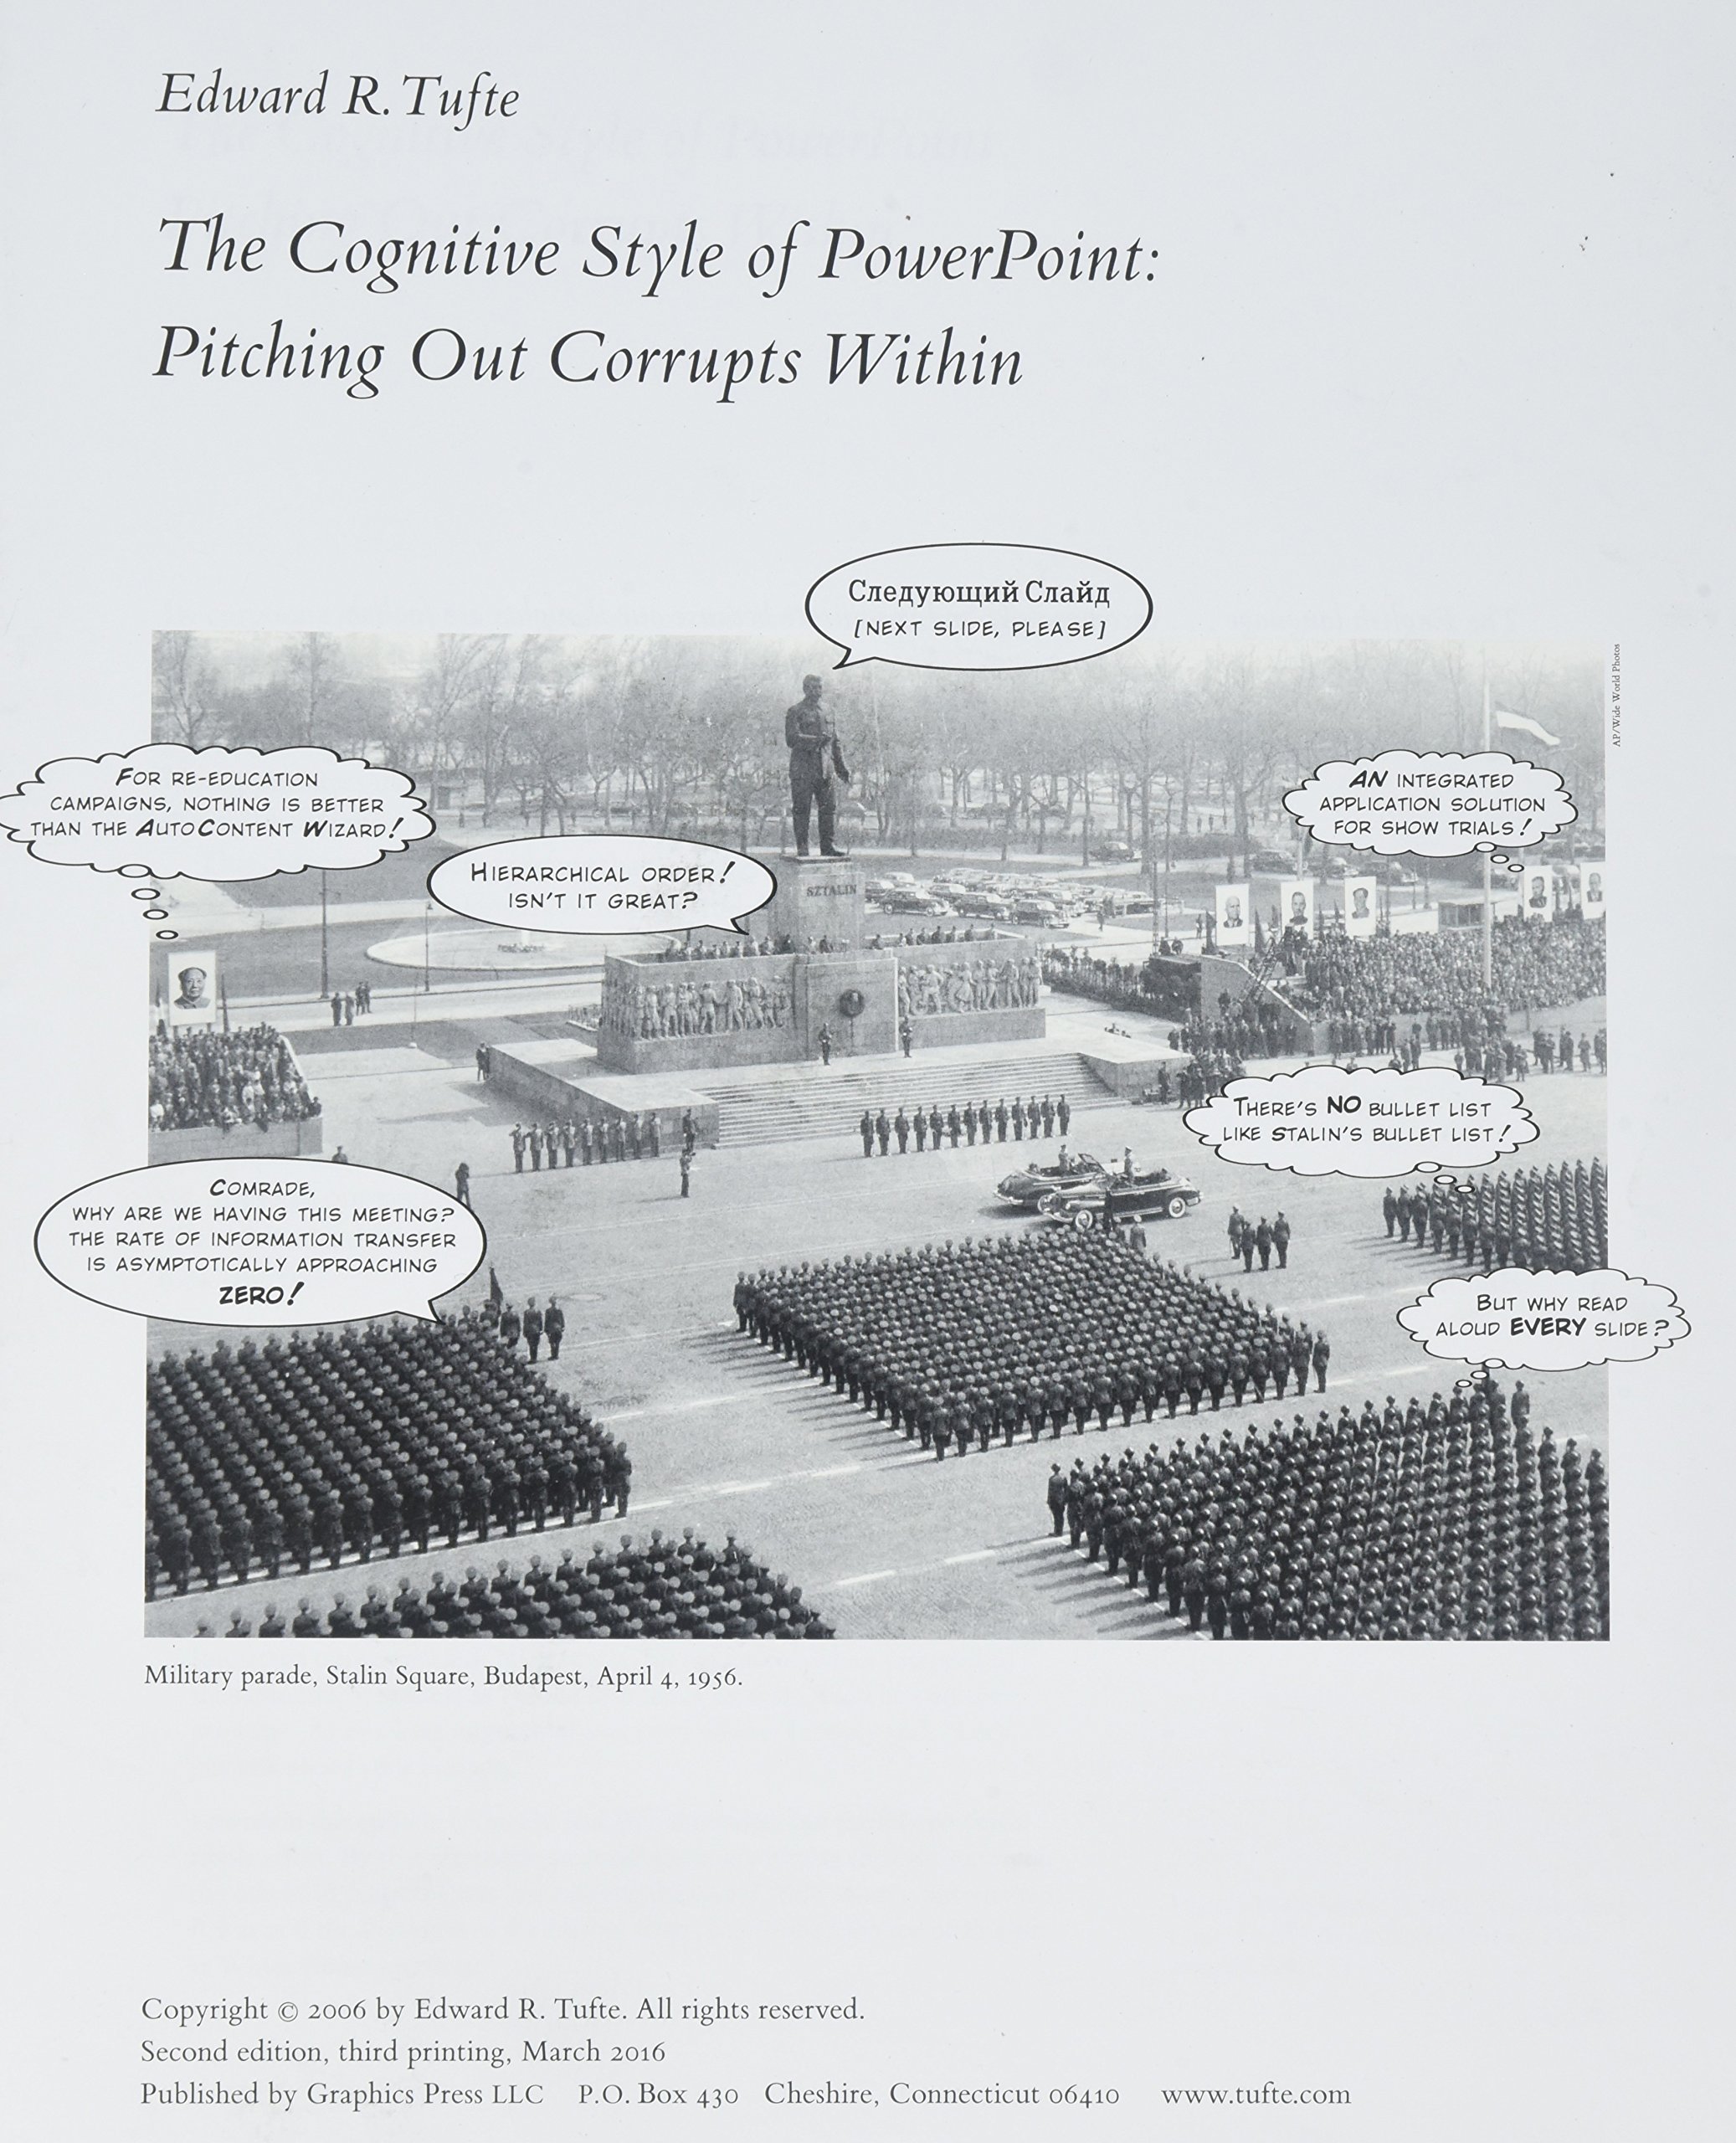 The cognitive style of powerpoing